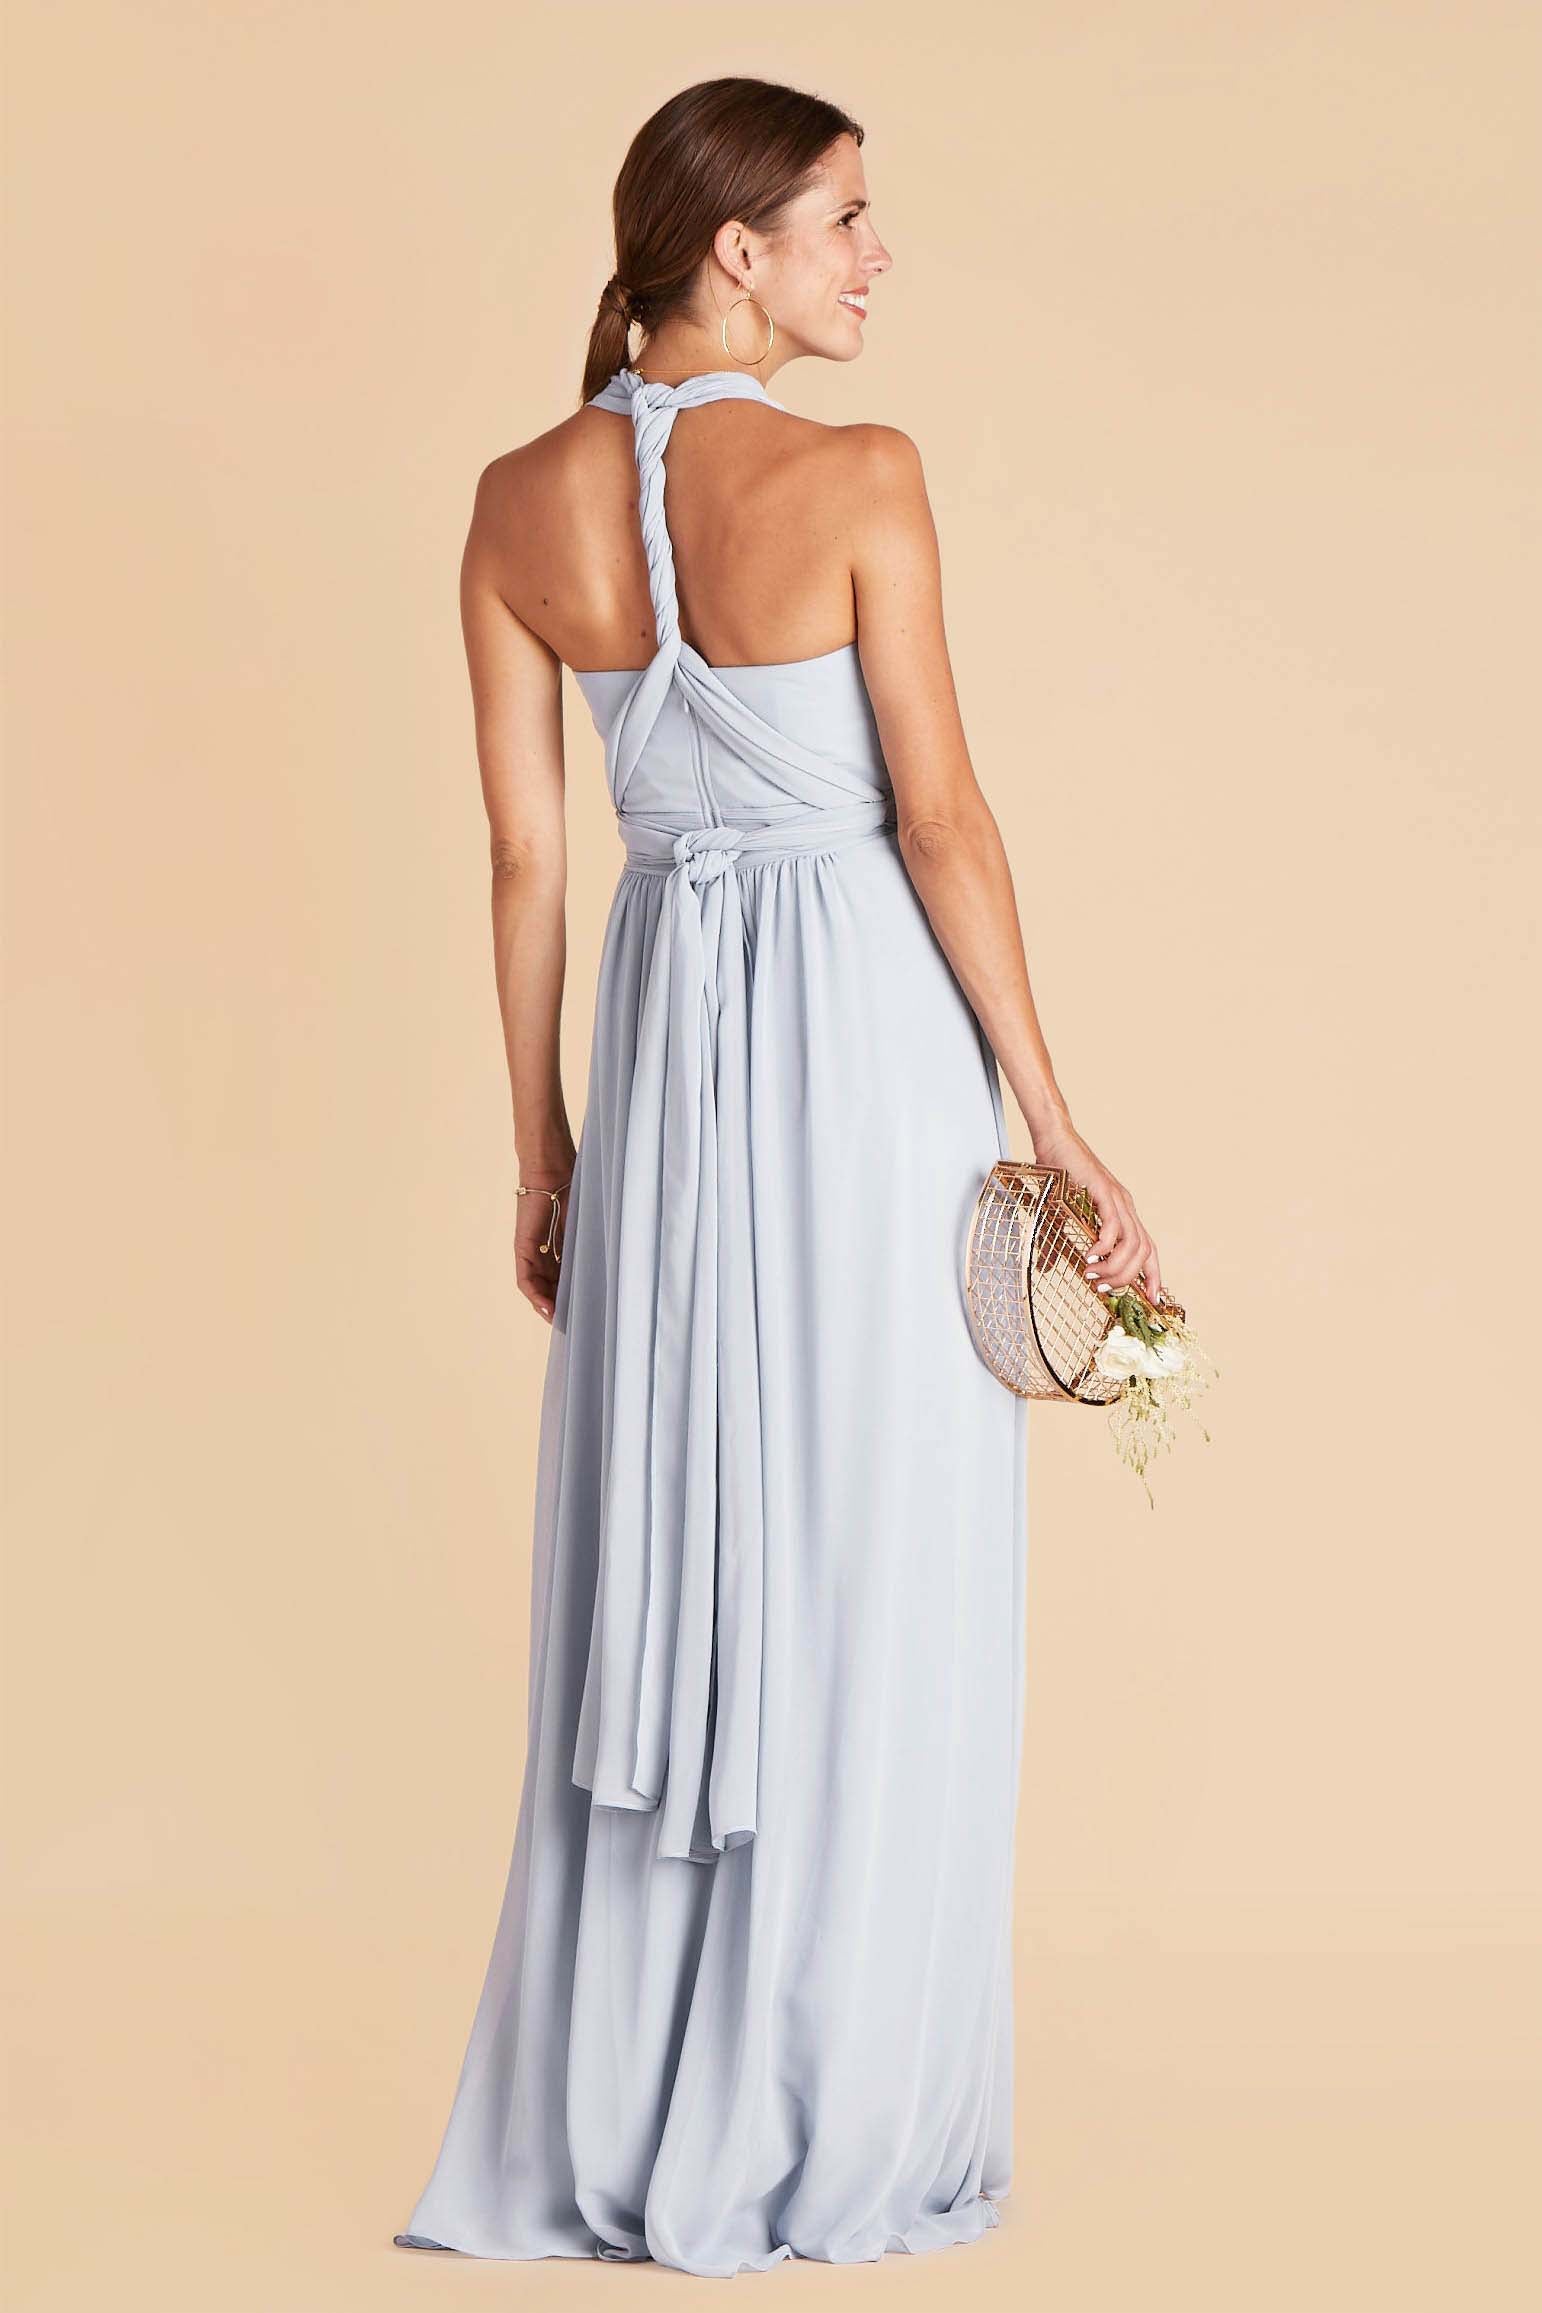 Grace convertible bridesmaid dress in ice blue chiffon by Birdy Grey